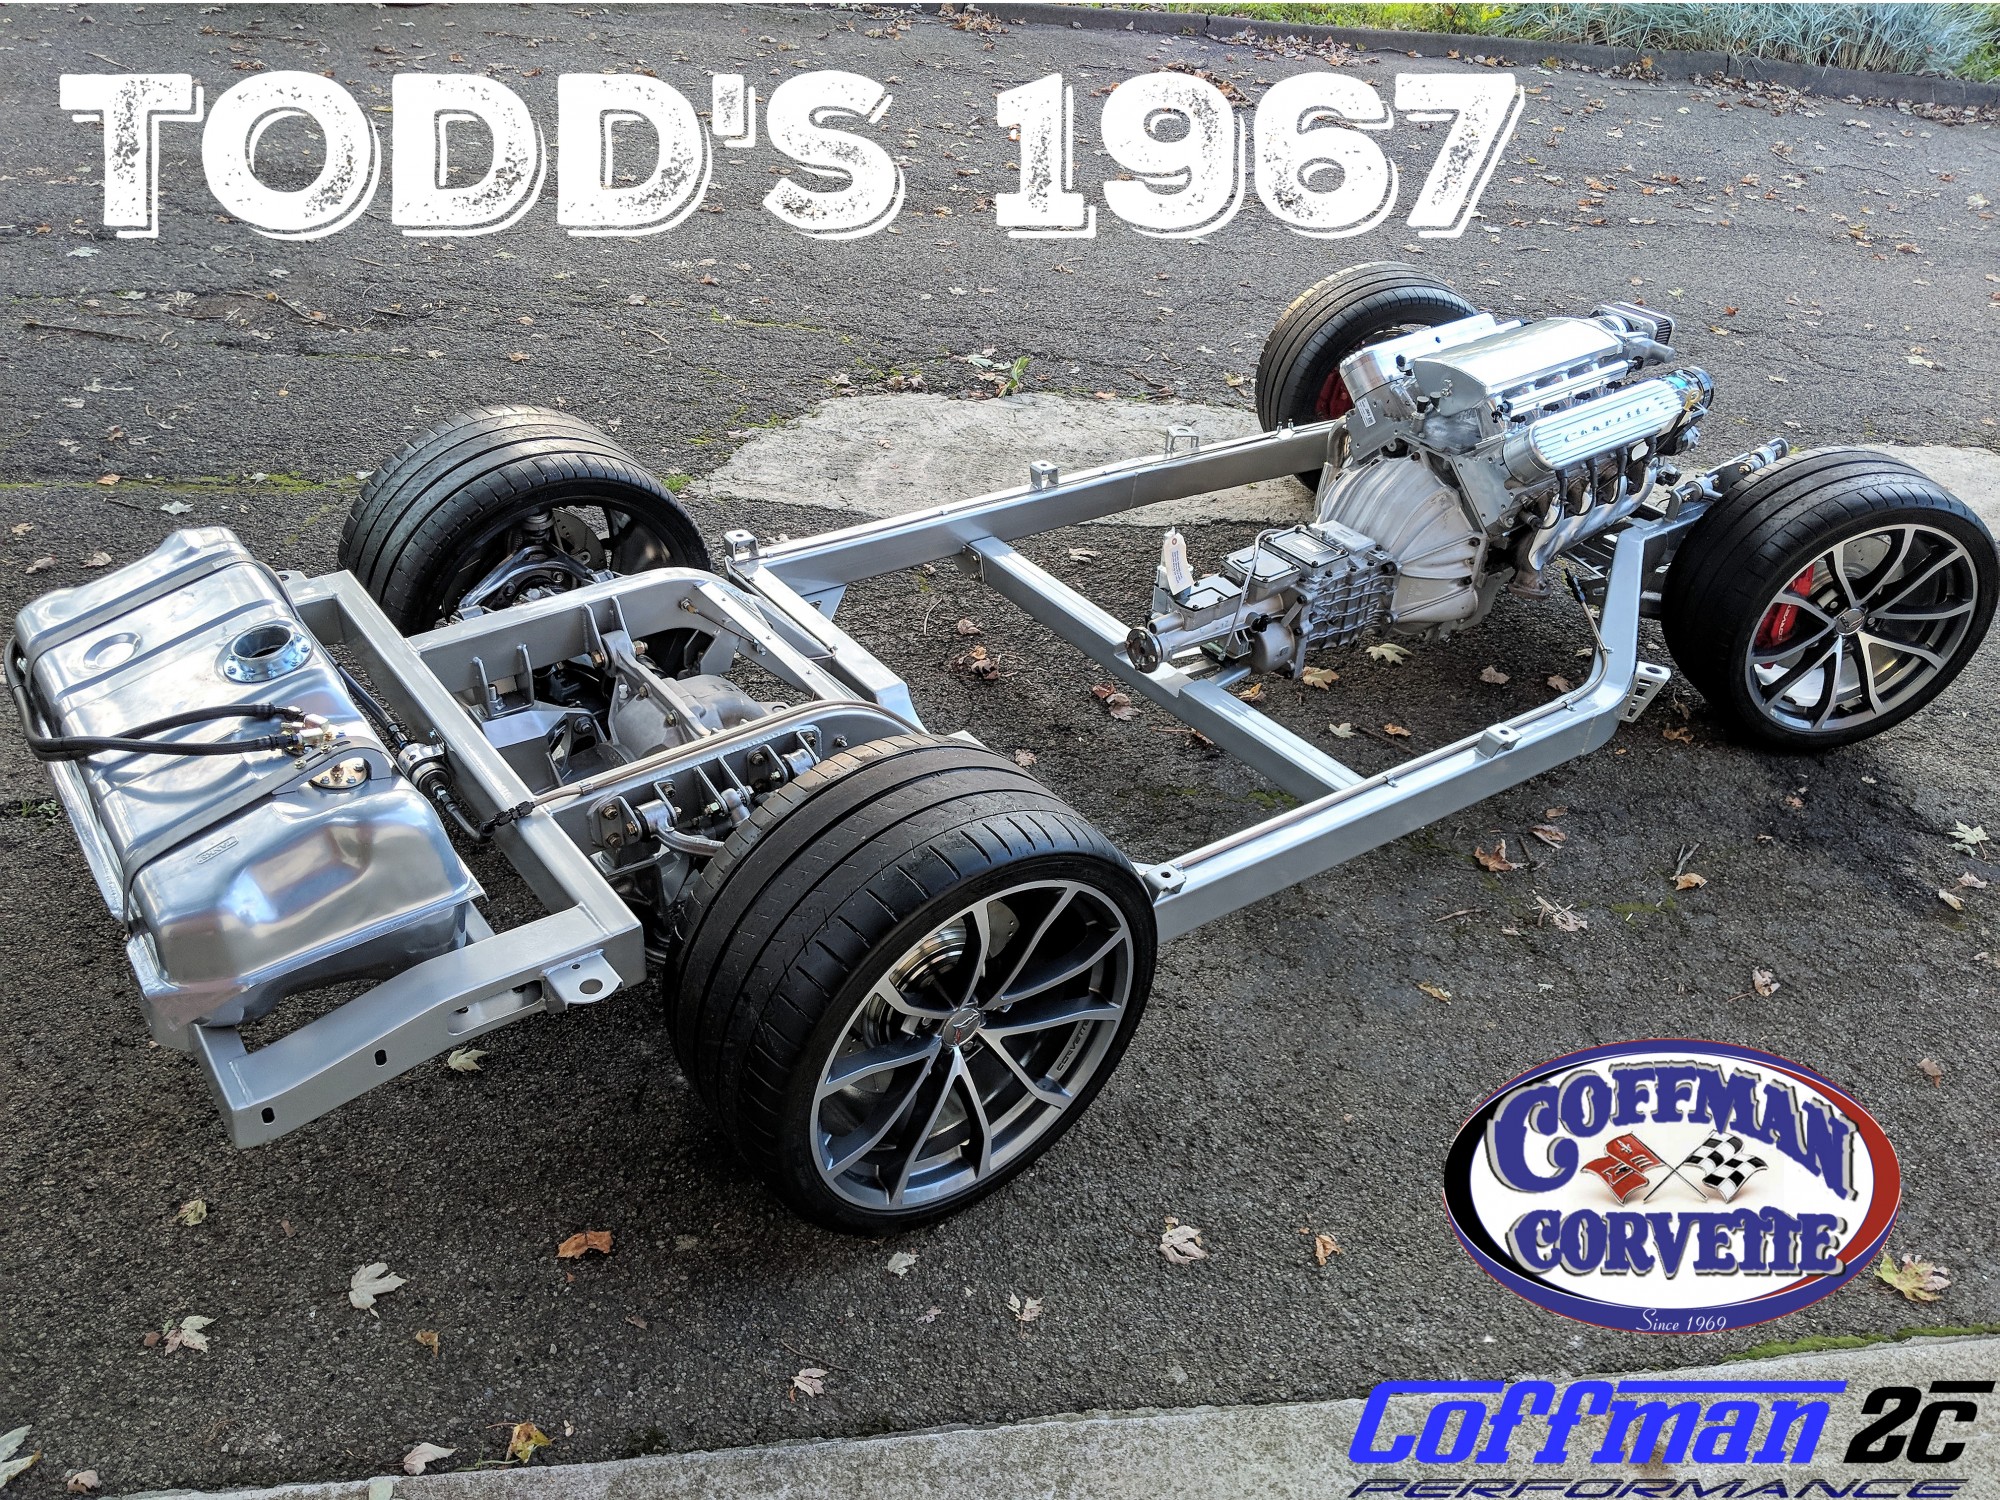 TODD'S 1967 CHASSIS